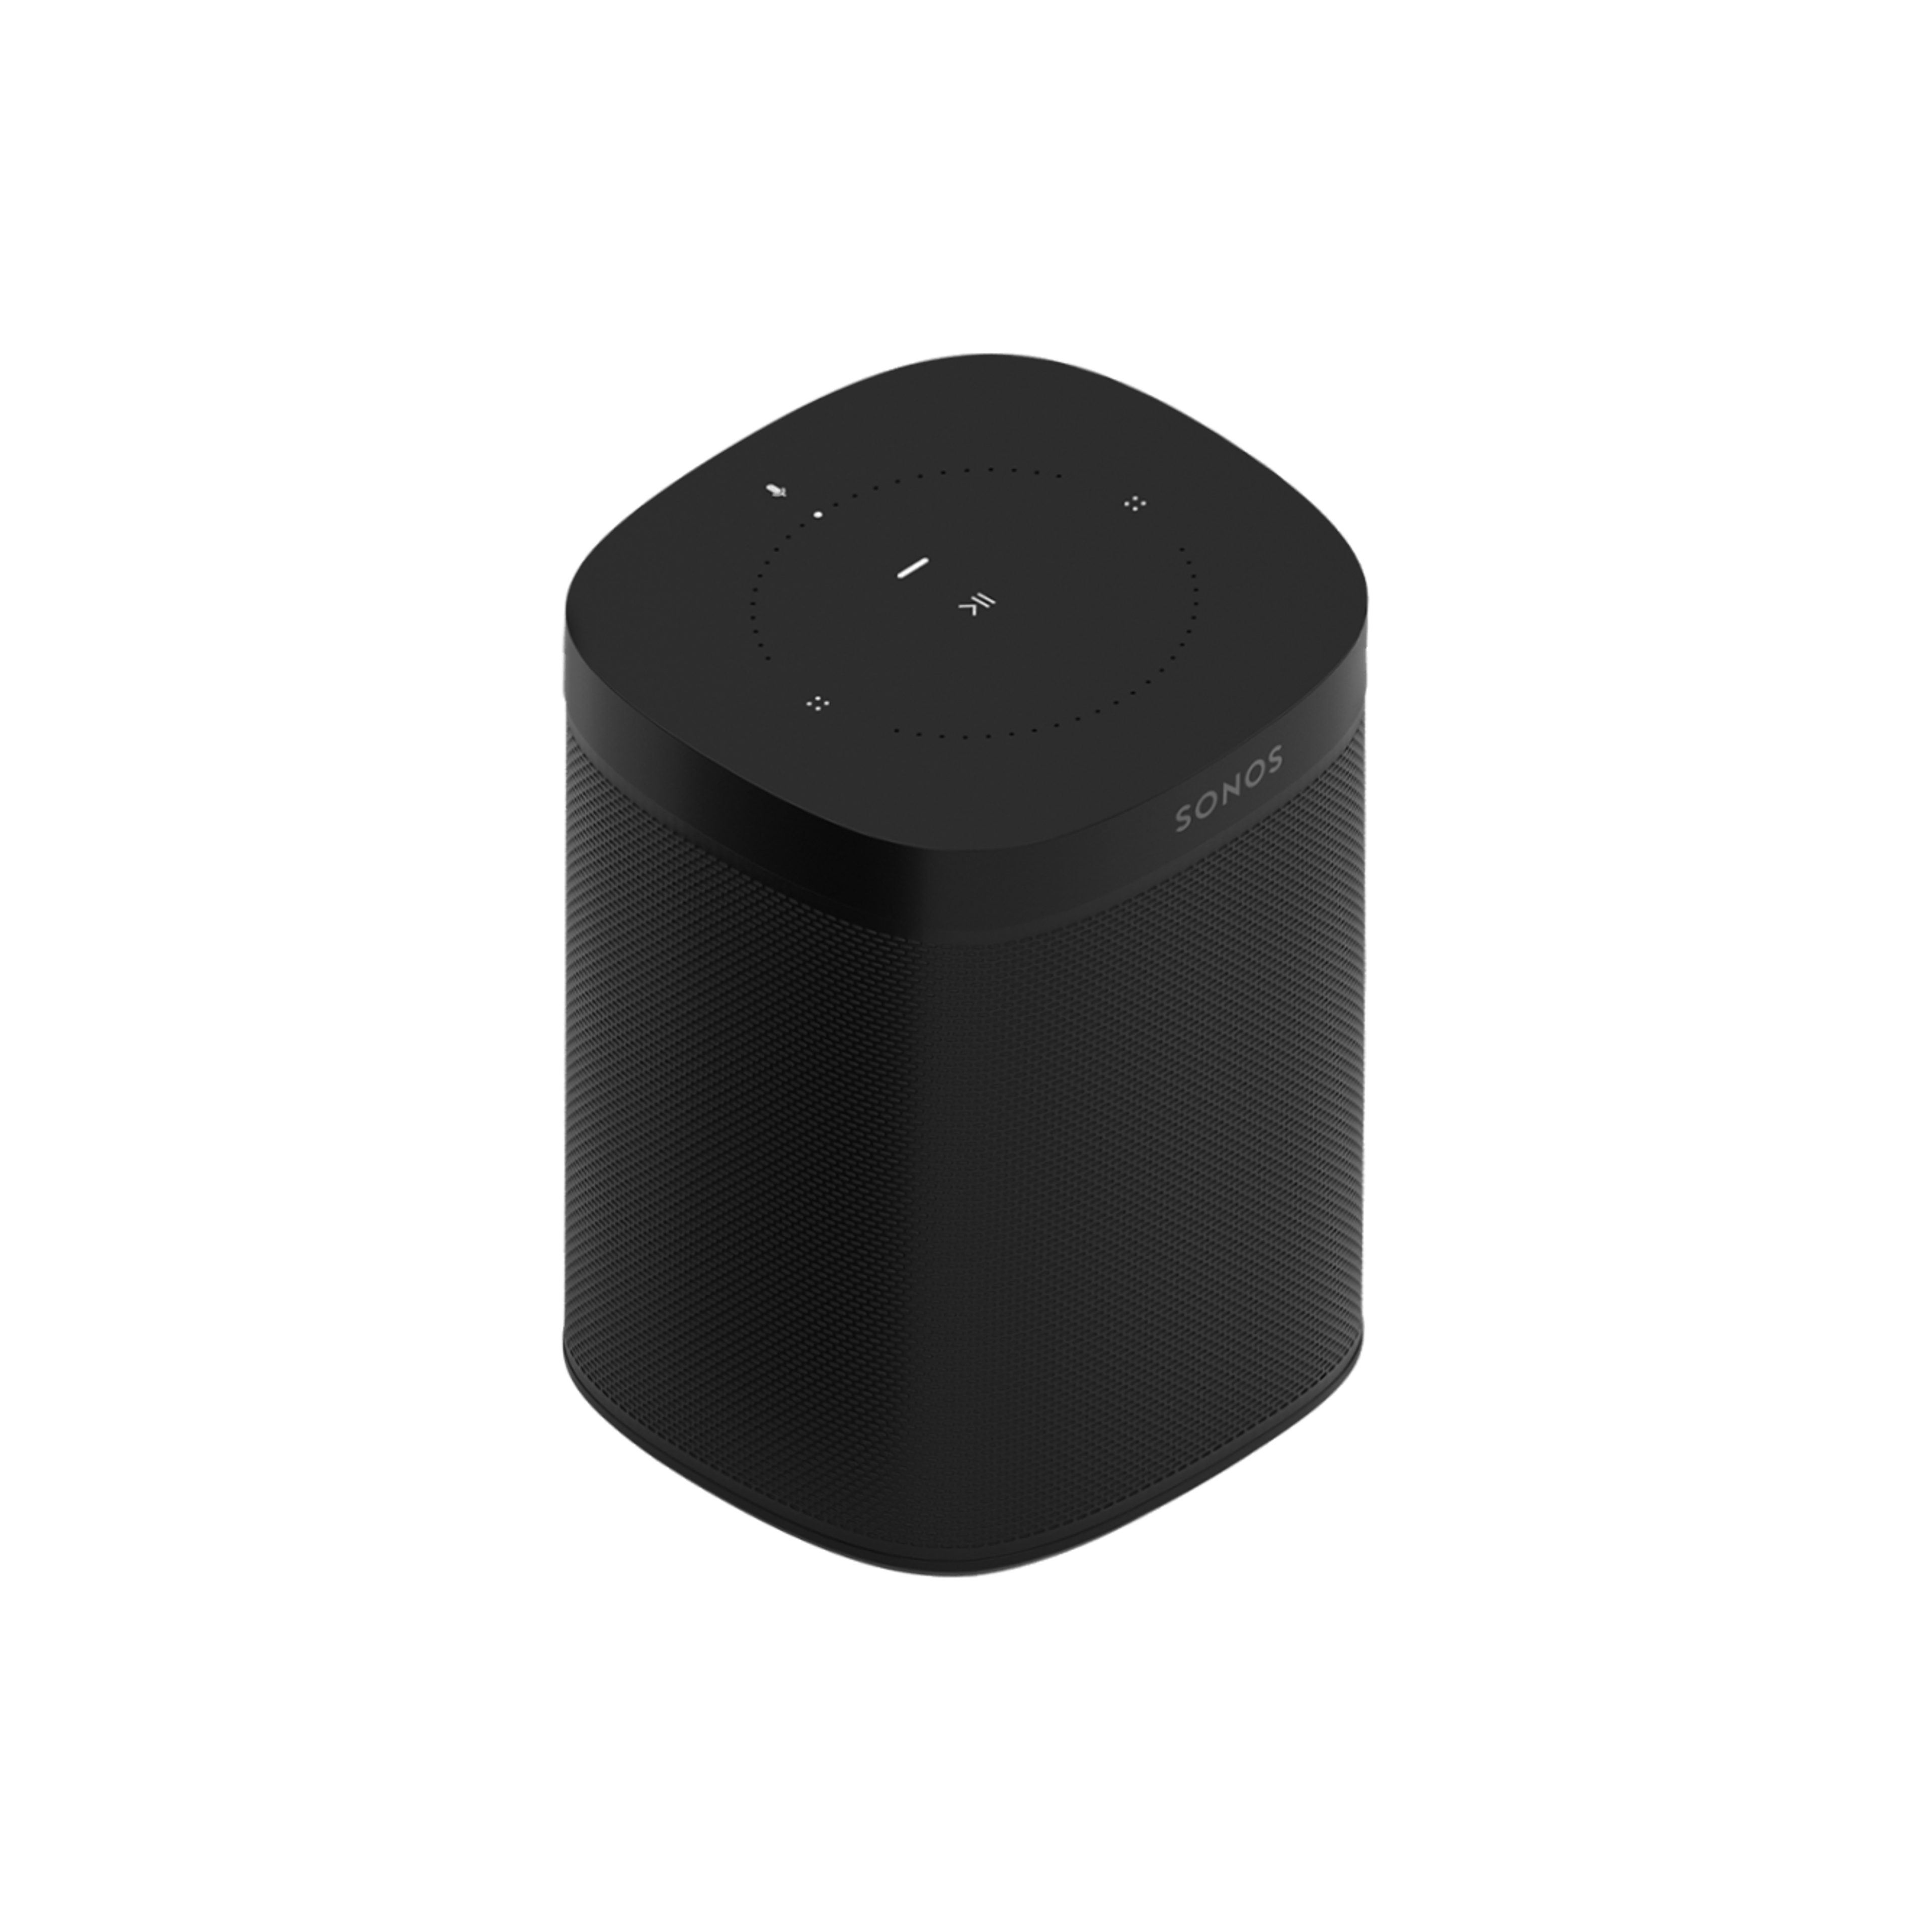 Image of a black Sonos One turned at an angle